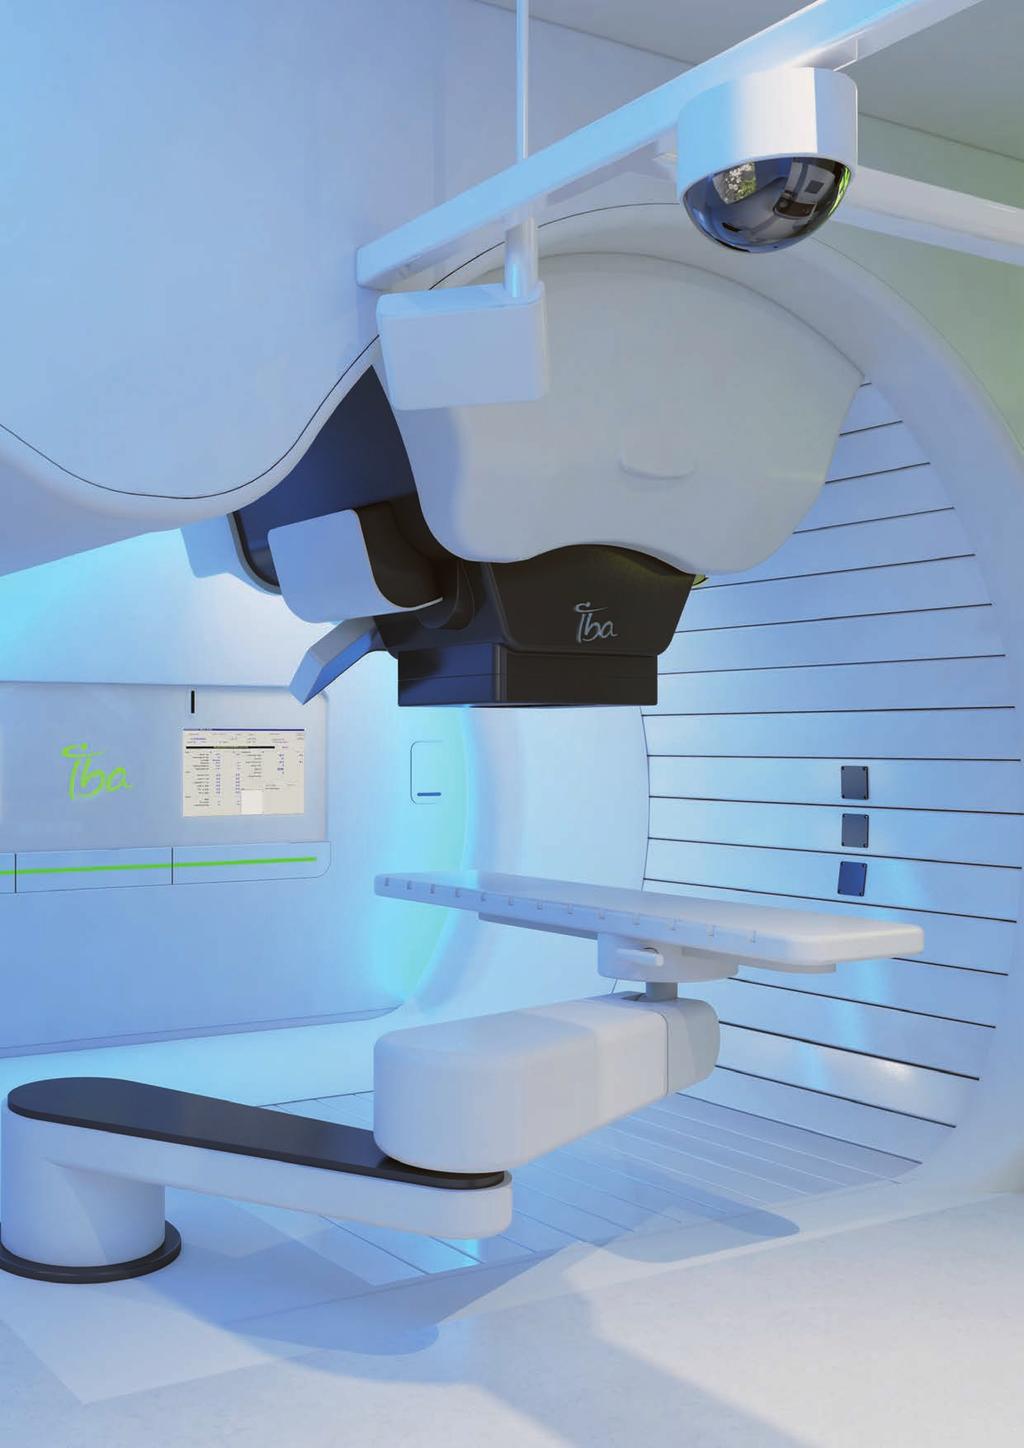 GLOBAL STRATEGY PROTON THERAPY IBA, WORLD LEADER ON A GROWING MARKET At the Willis-Knighton Cancer Center in Shreveport, Louisiana, we wanted to offer the latest form of proton therapy, the pencil